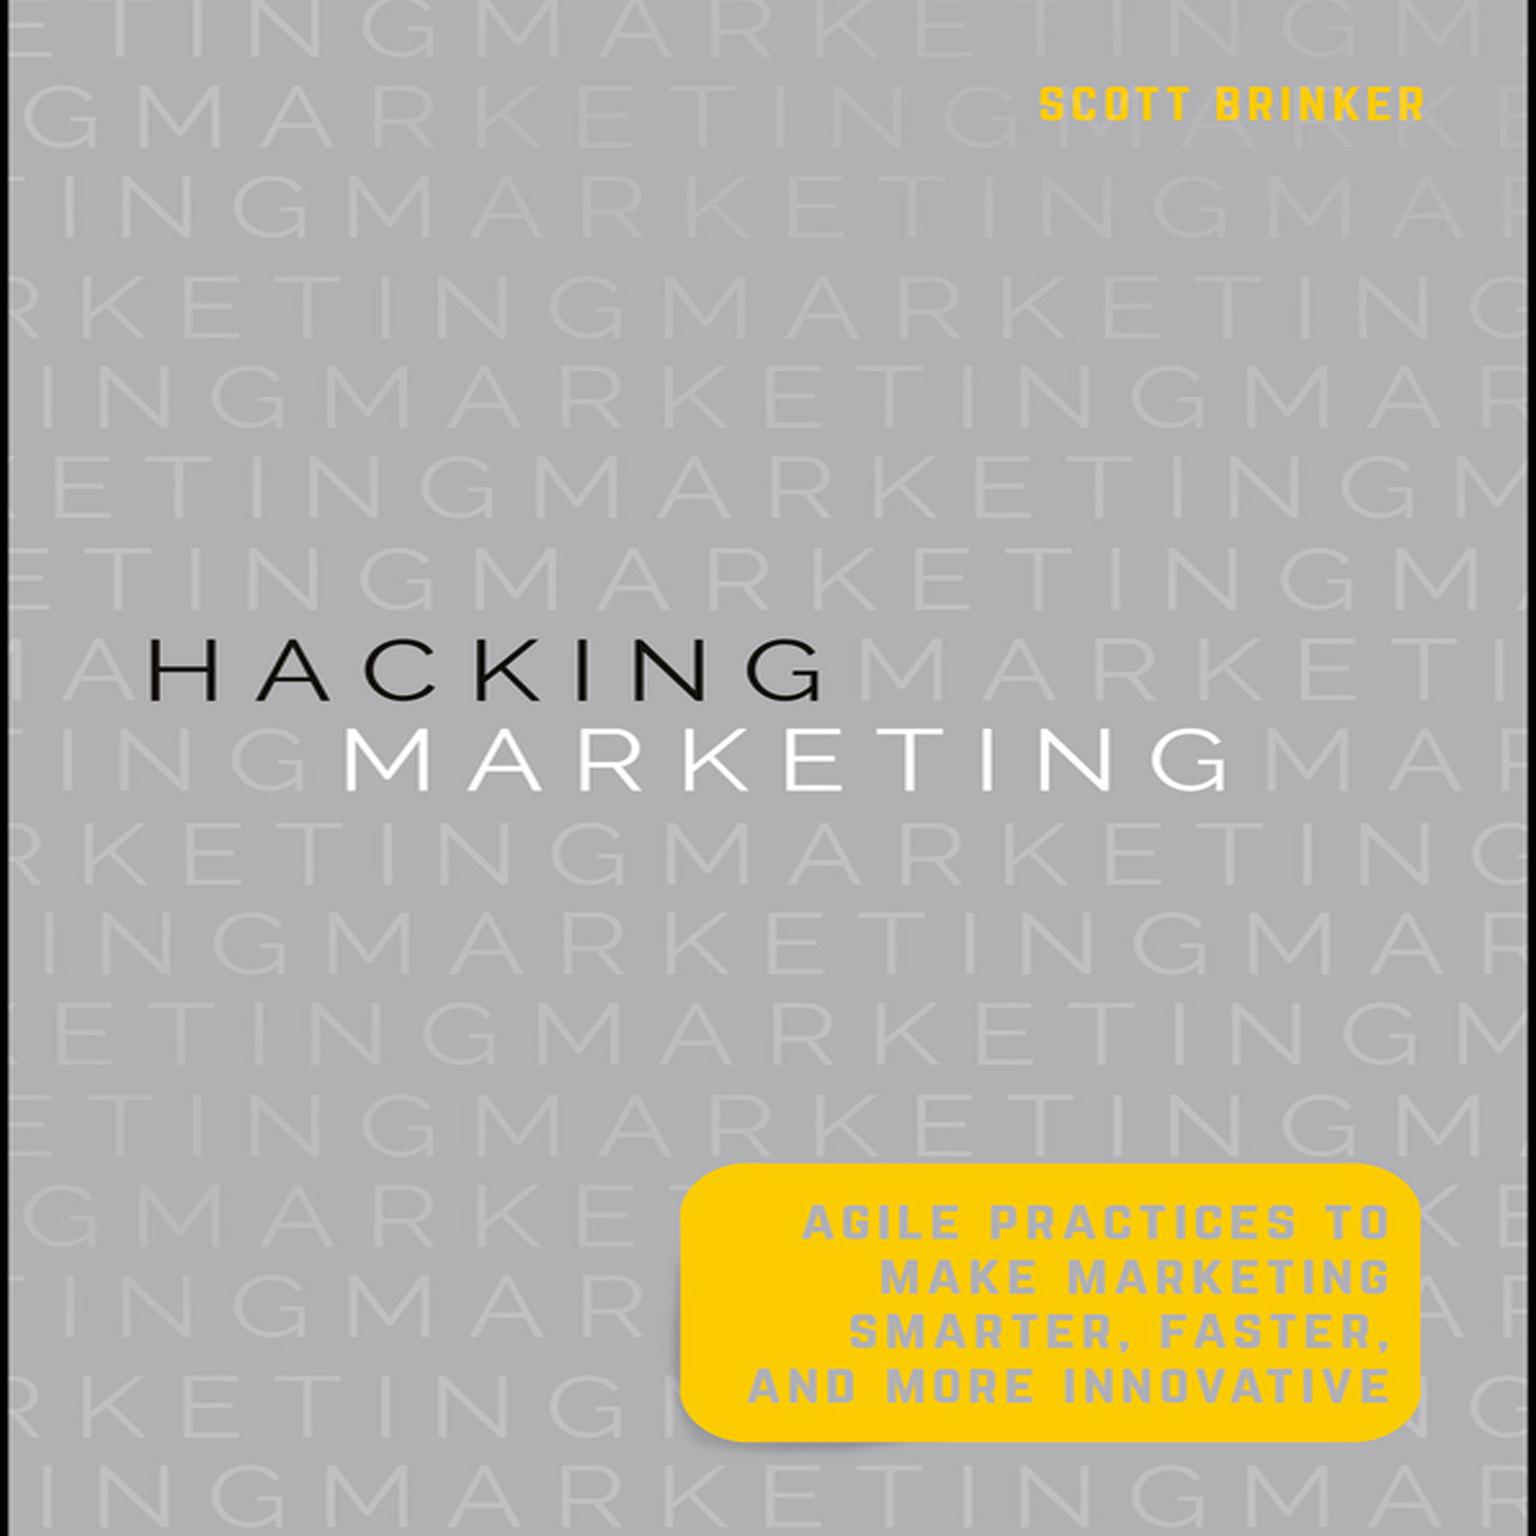 Hacking Marketing: Agile Practices to Make Marketing Smarter, Faster, and More Innovative Audiobook, by Scott Brinker